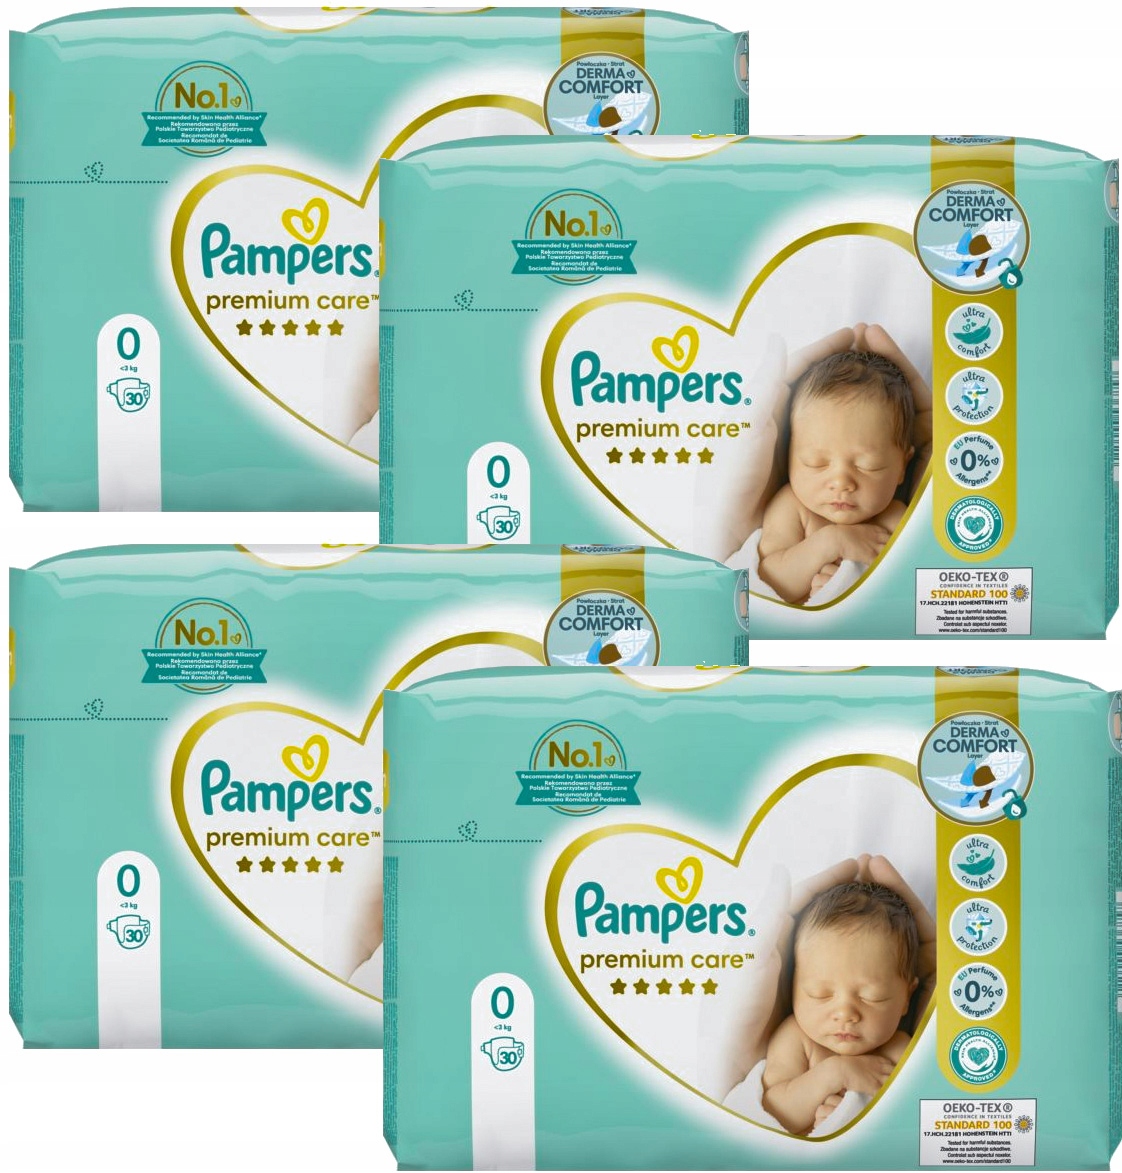 ipson pampers